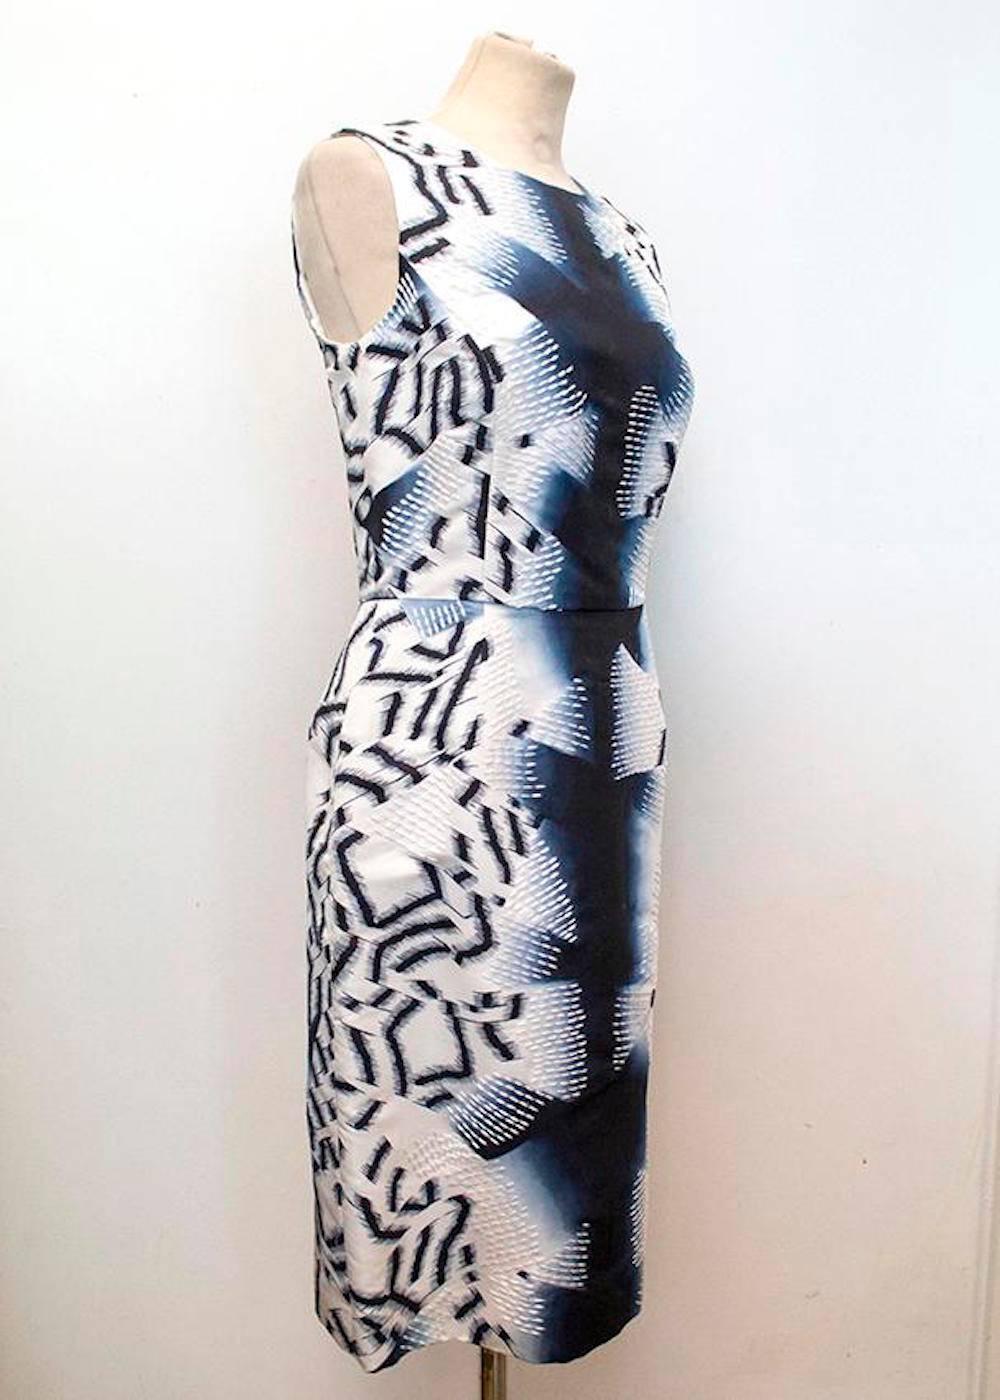 Oscar de la Renta abstract print sleeveless silk dress with white embroidery. Fitted style that is cinched at the waist with soft boat neckline.

- Made in USA
- Dry clean only
- Fully line with internal grosgrain ribbon waist fastening
- Invisible